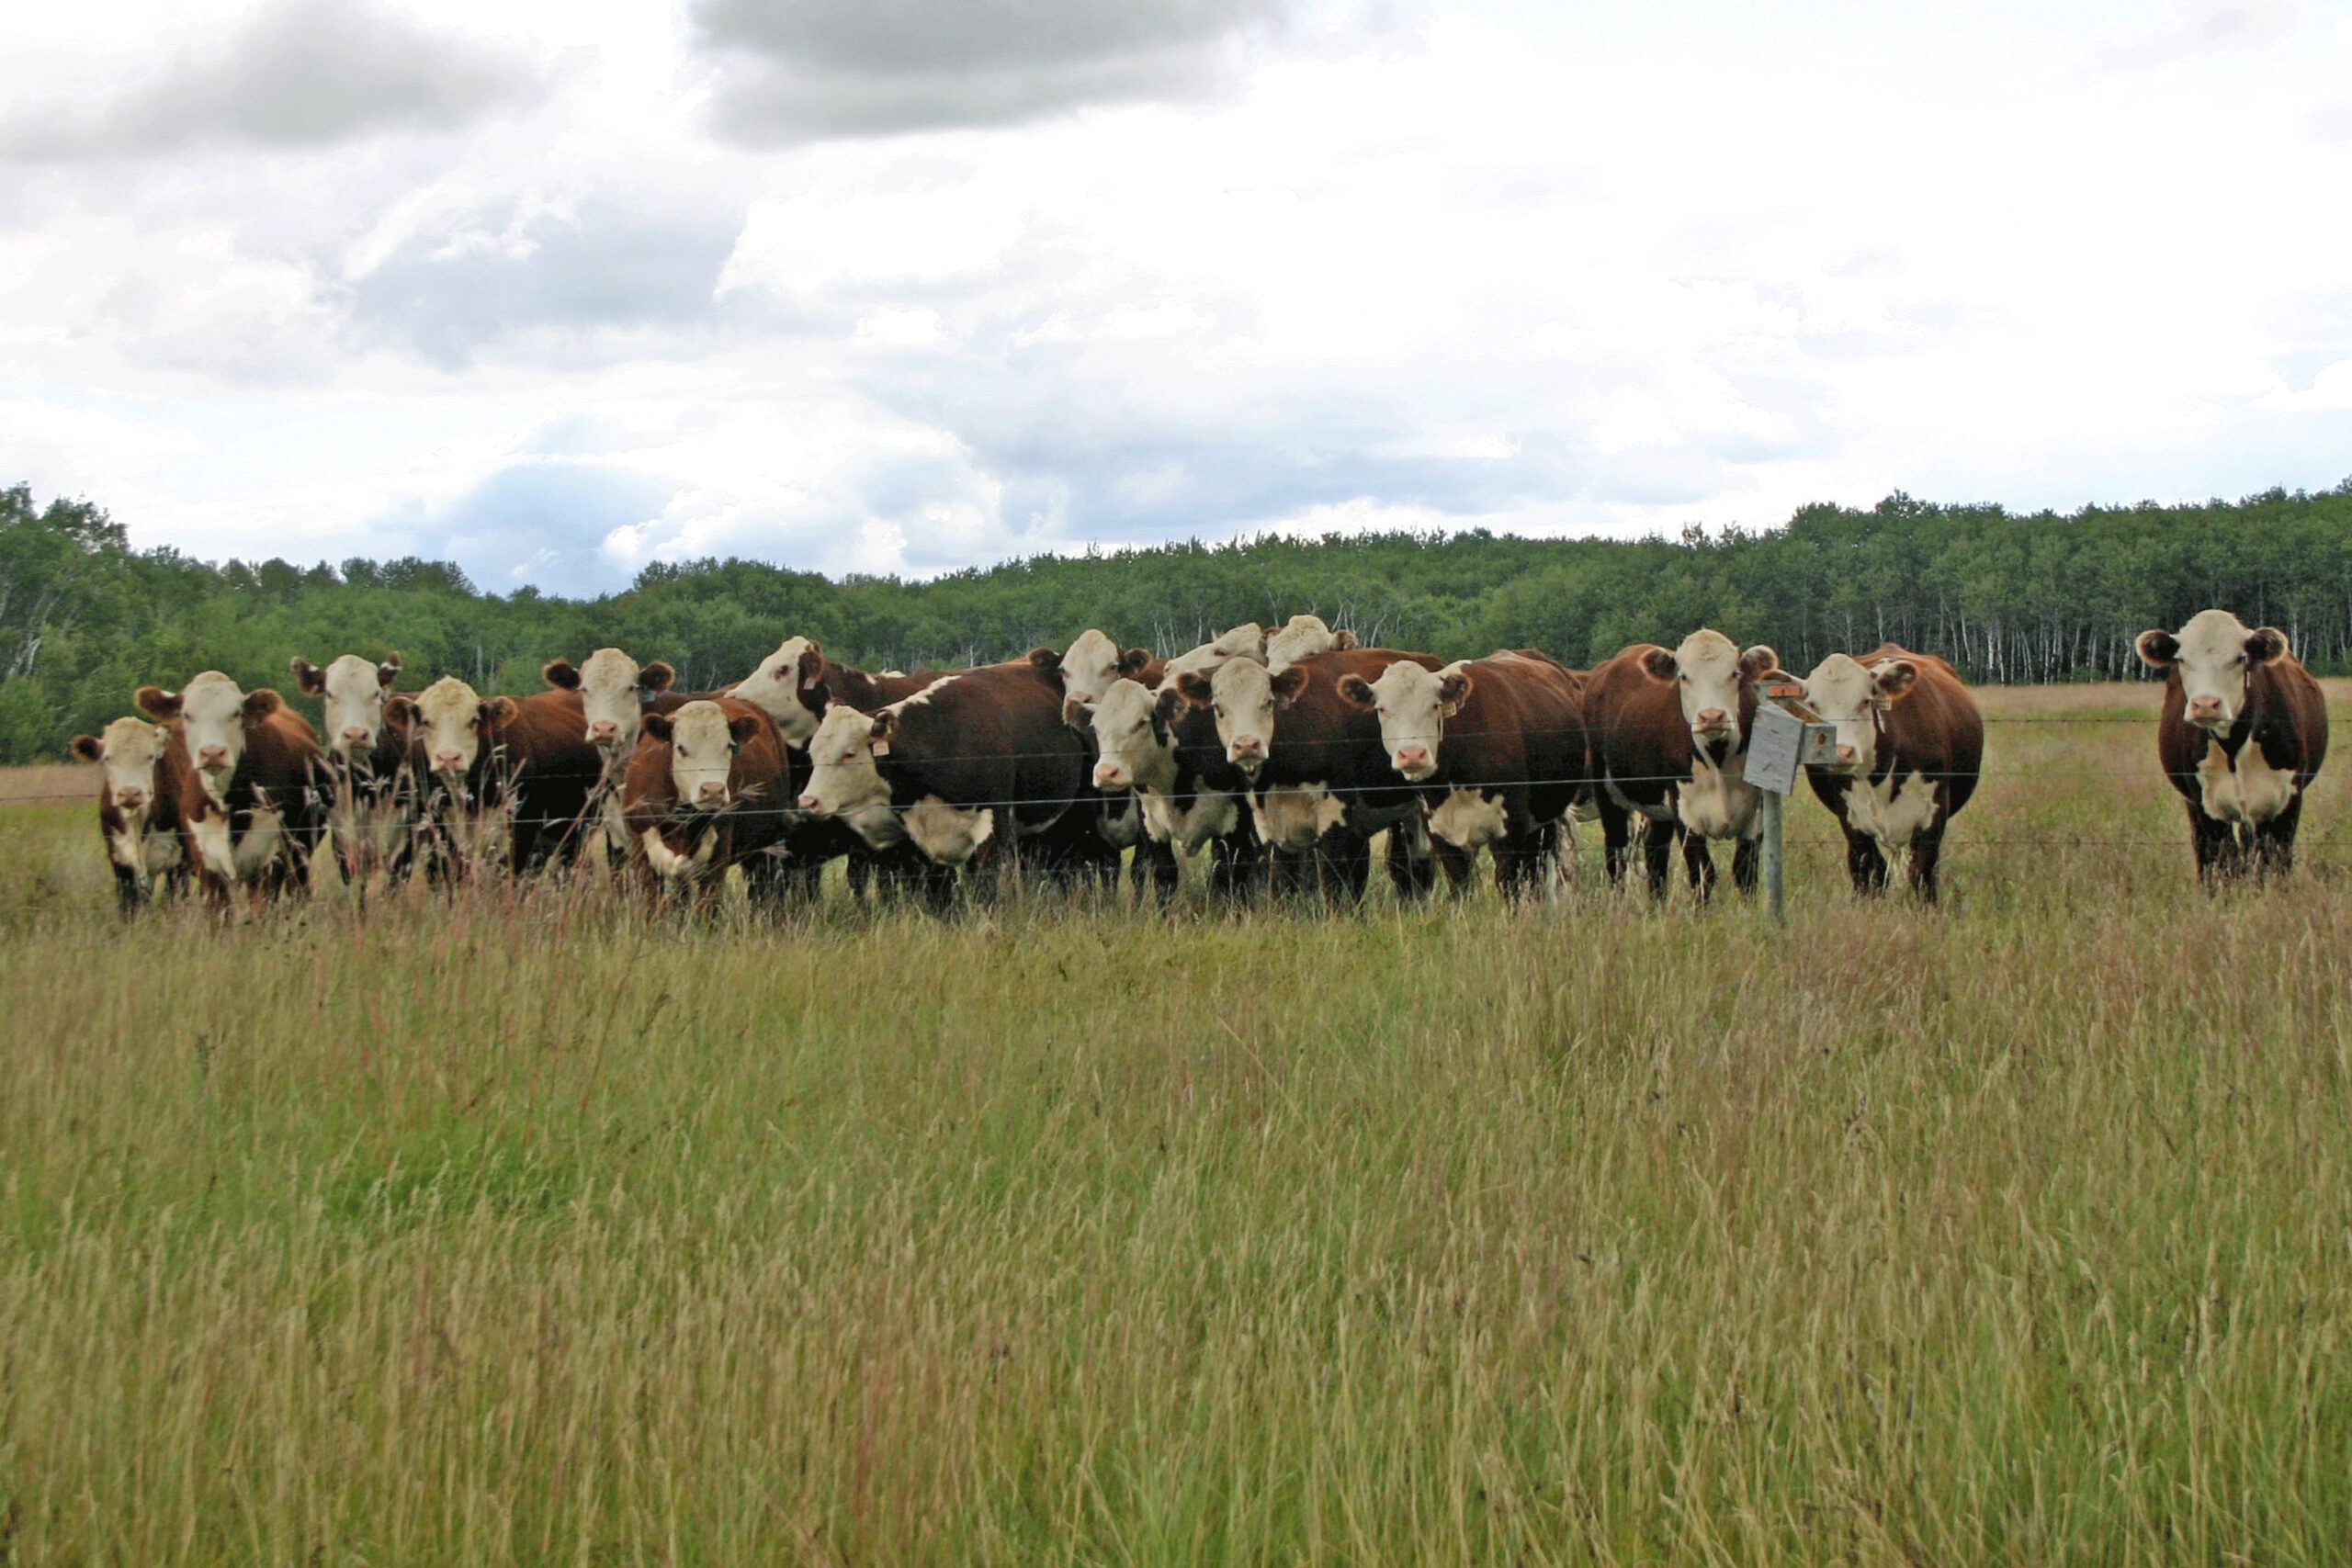 A herd of brown and white cows cluster together in a field, staring towards the camera.